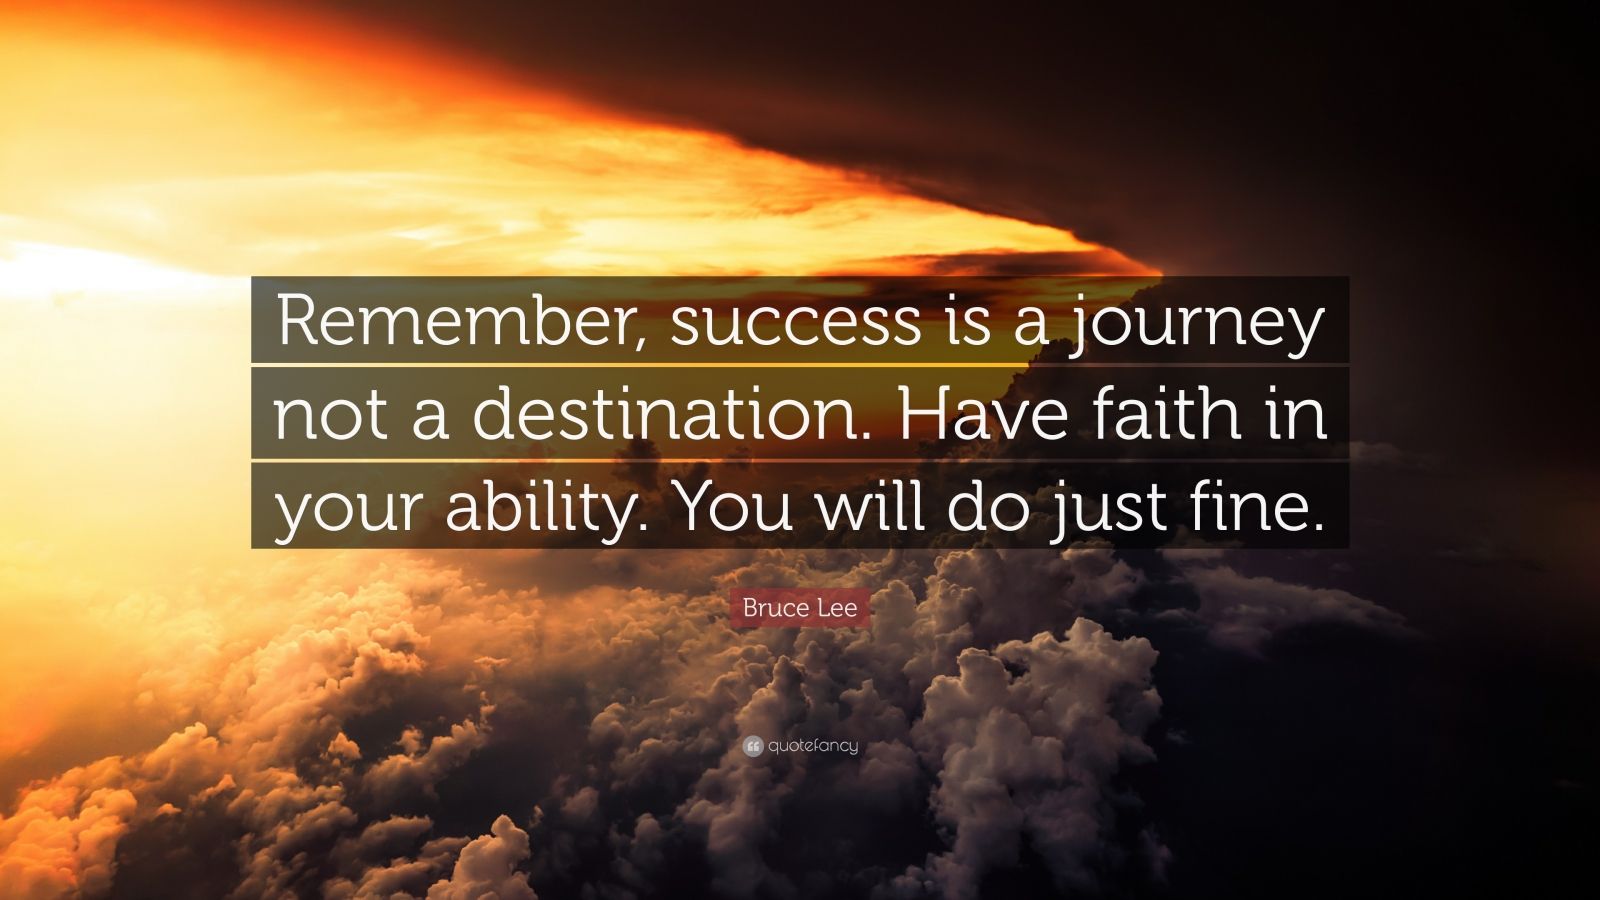 Bruce Lee Quote: “Remember, success is a journey not a destination